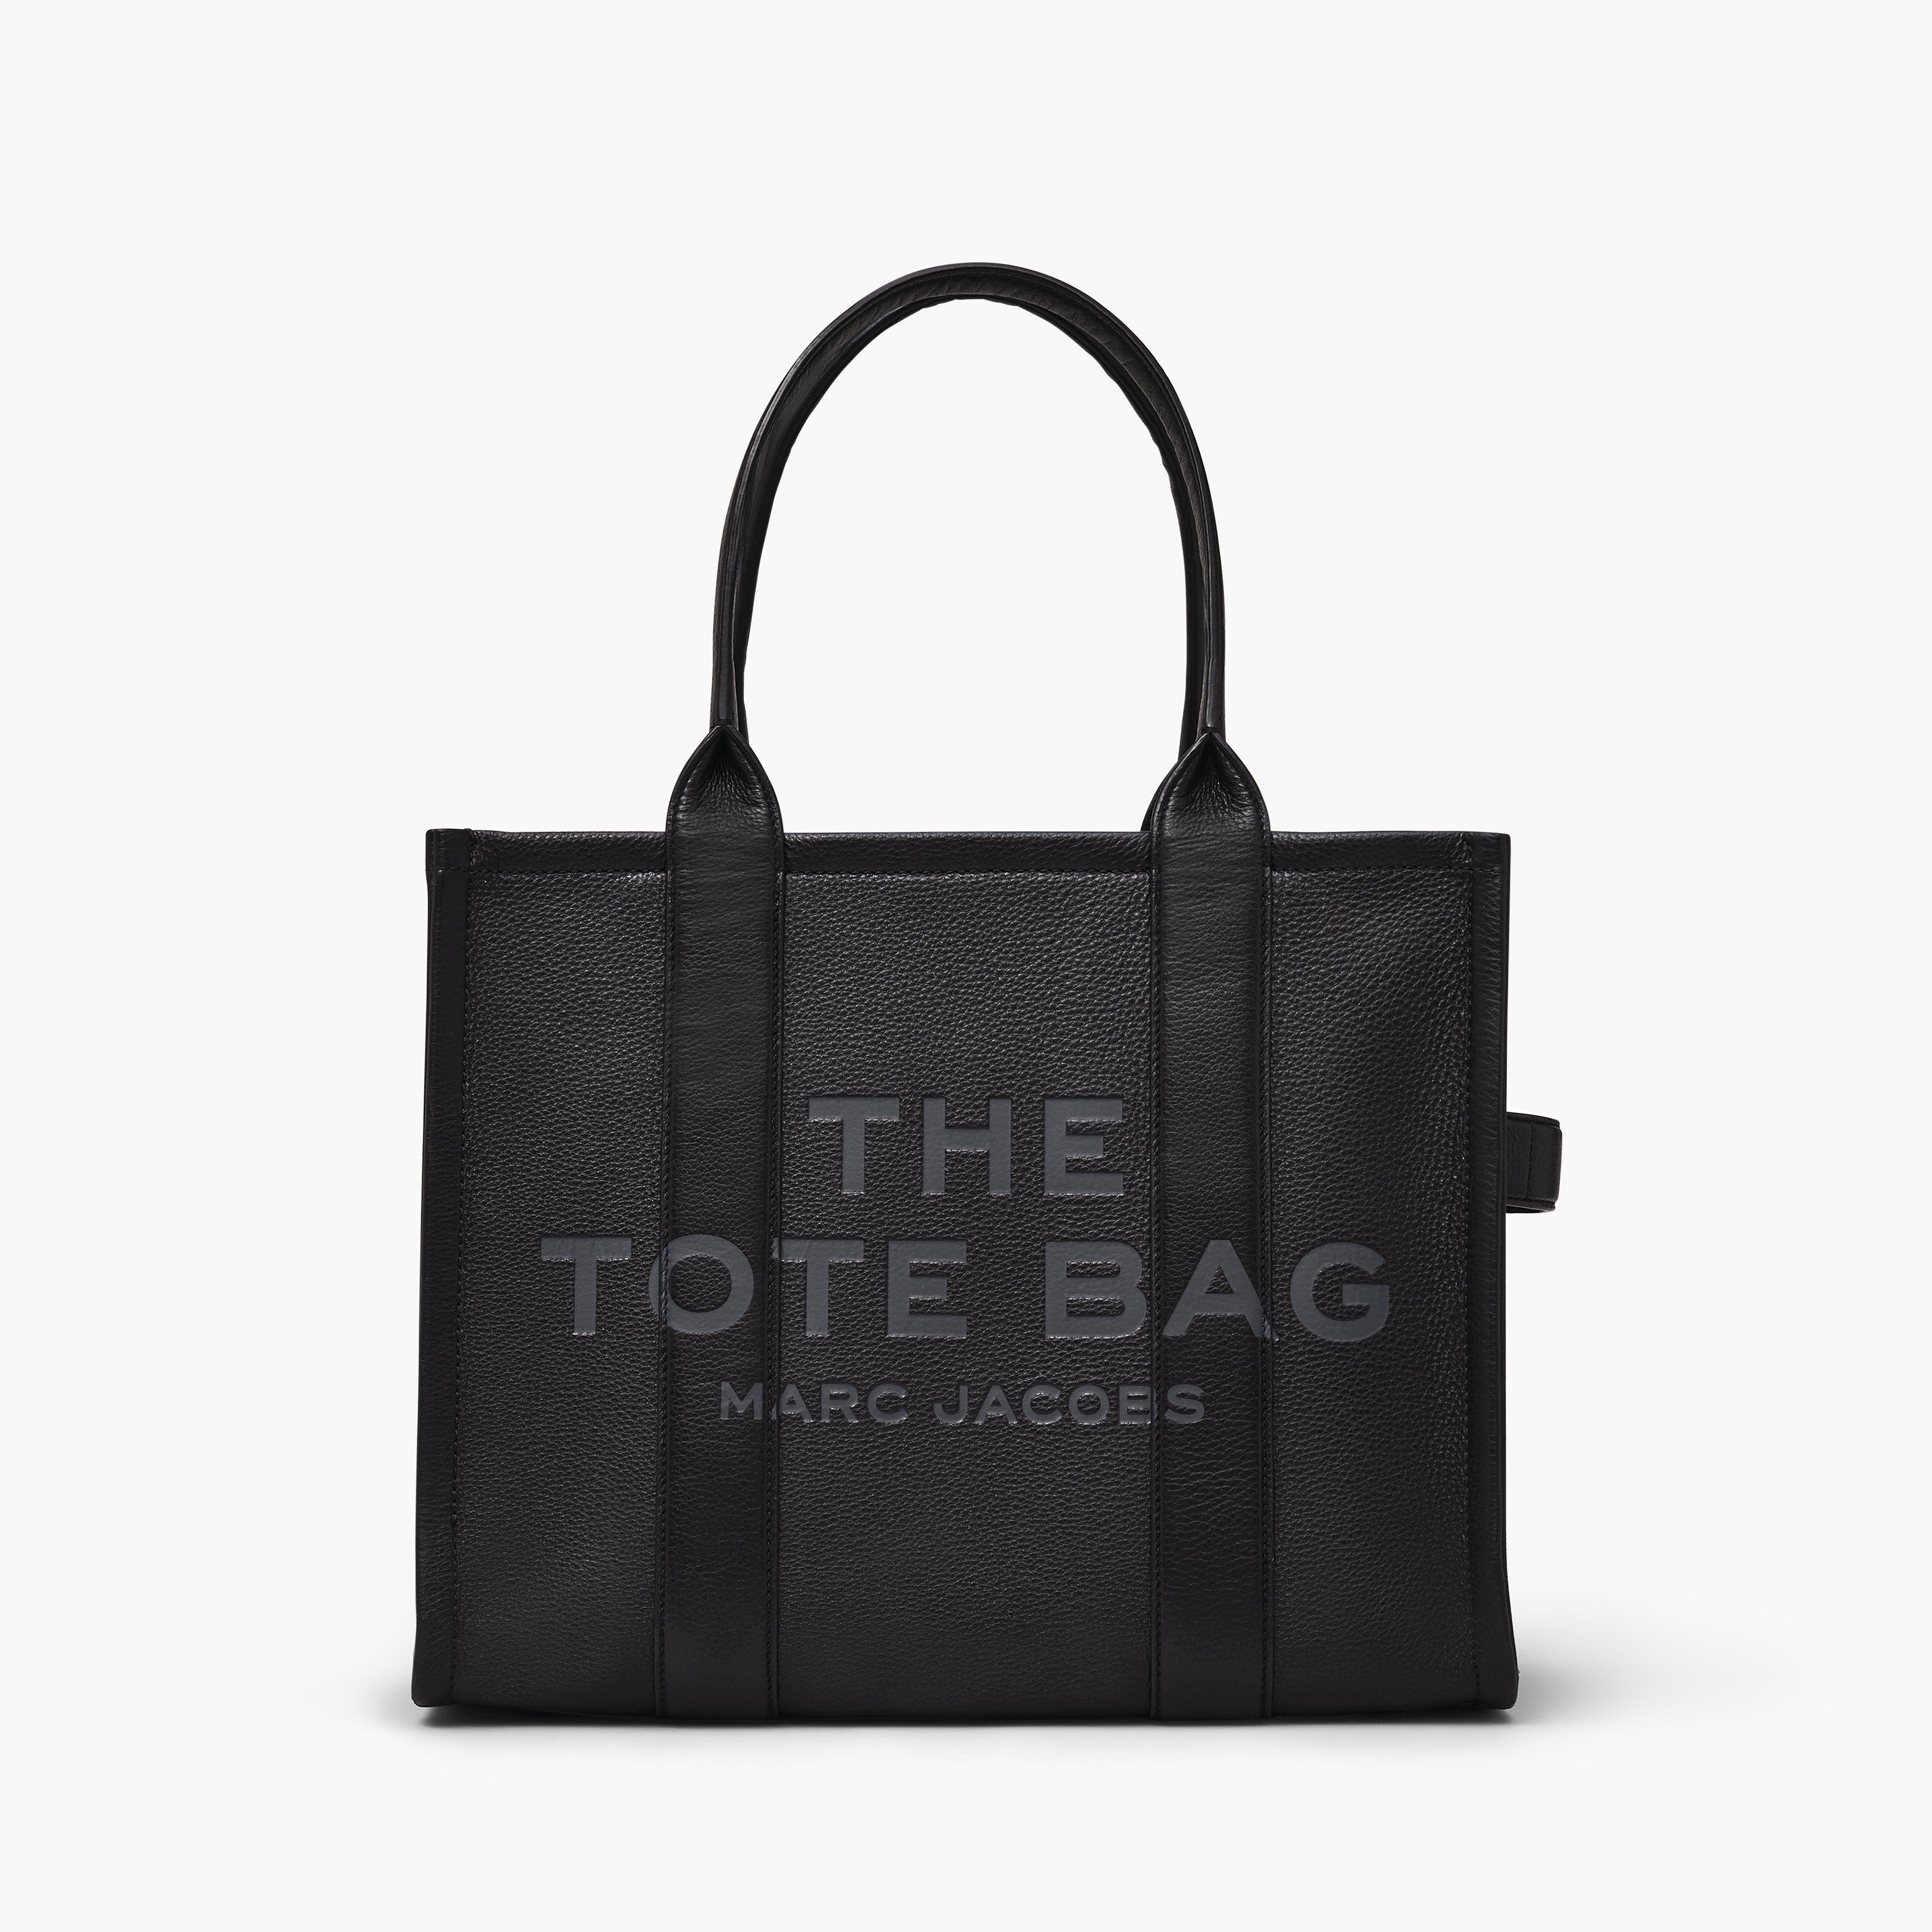 MARC JACOBS the tote bag large www.ugel01ep.gob.pe